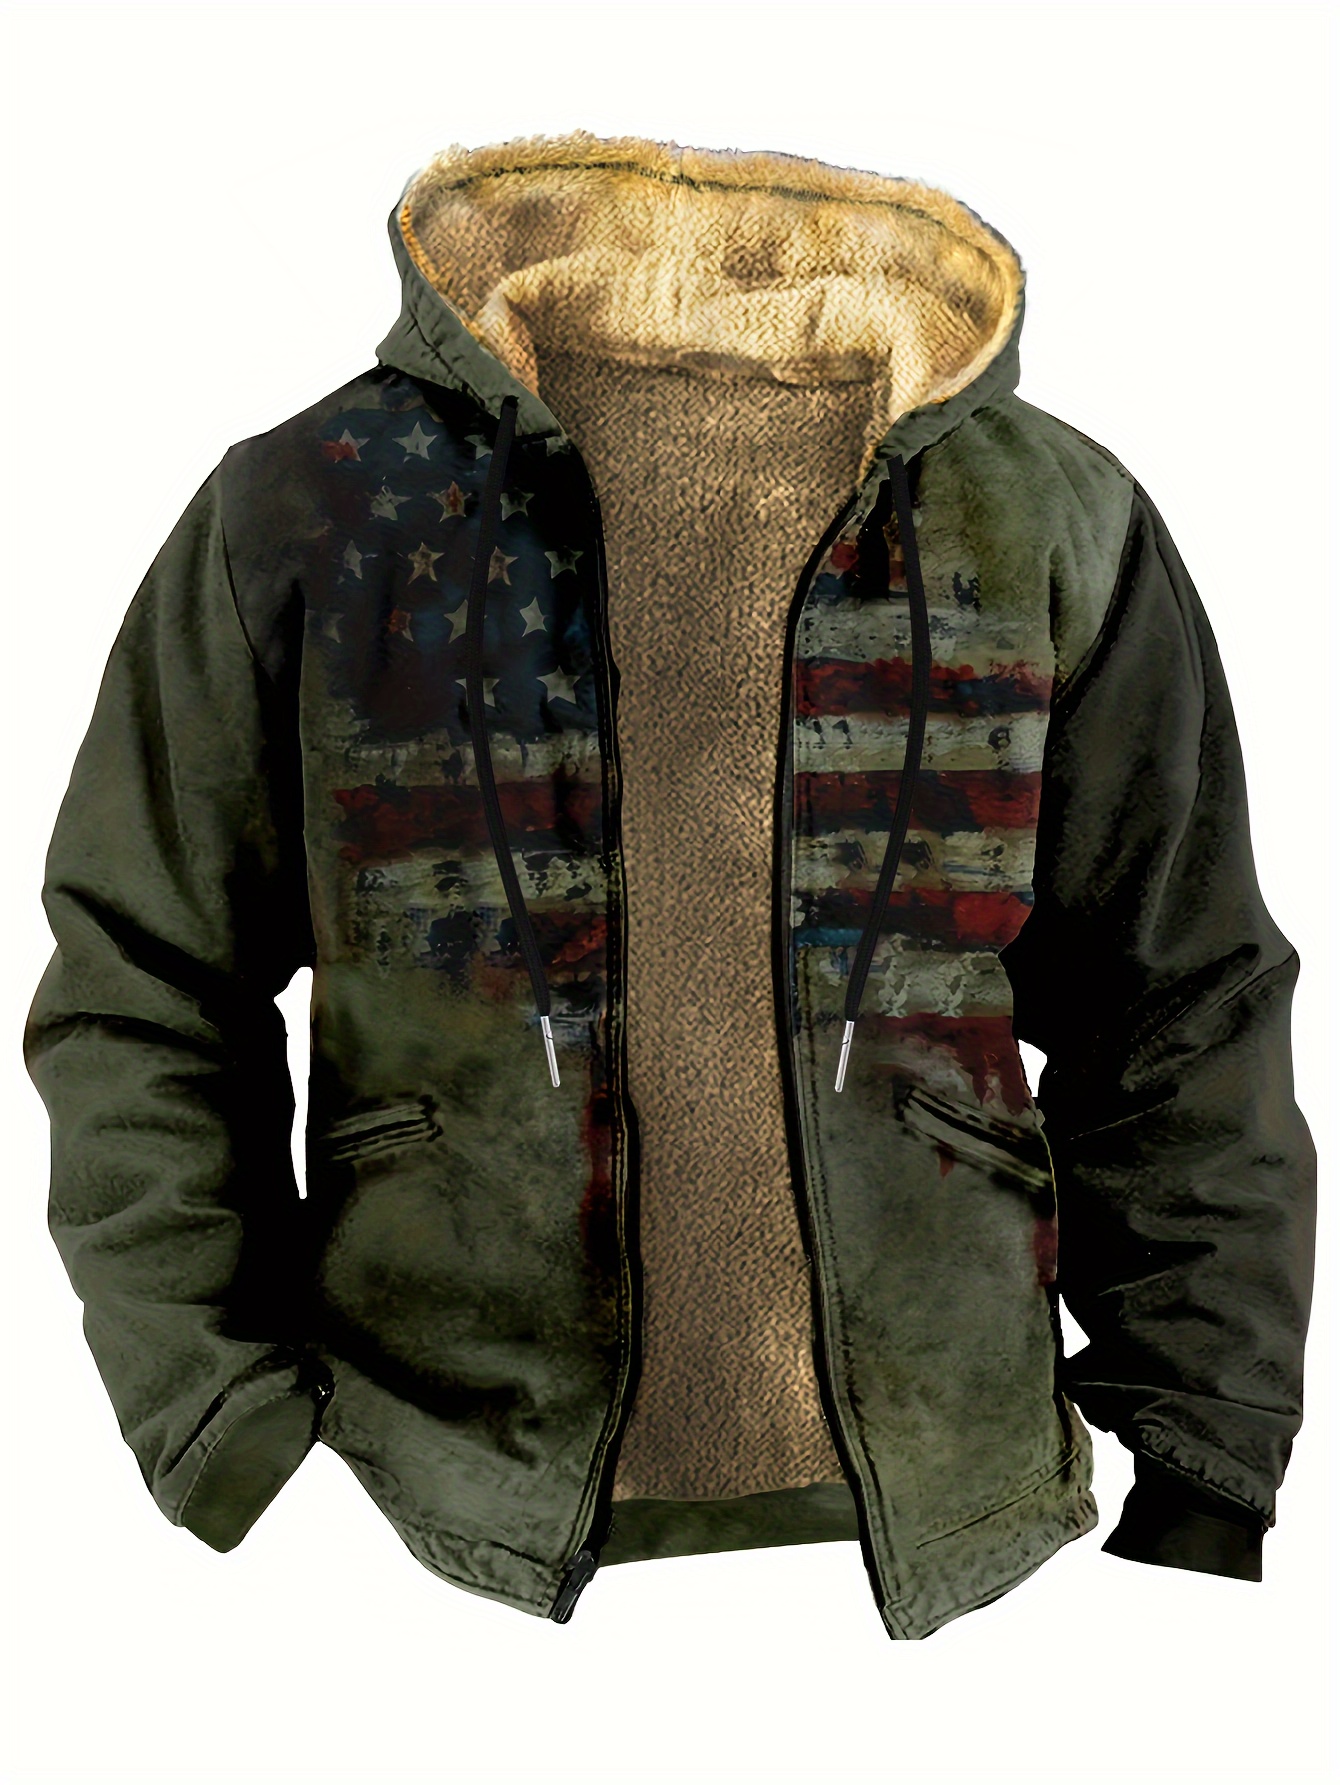 Vintage Style Warm Fleece Coat, Men's Casual Hooded Warm Thick Jacket For  Fall Winter